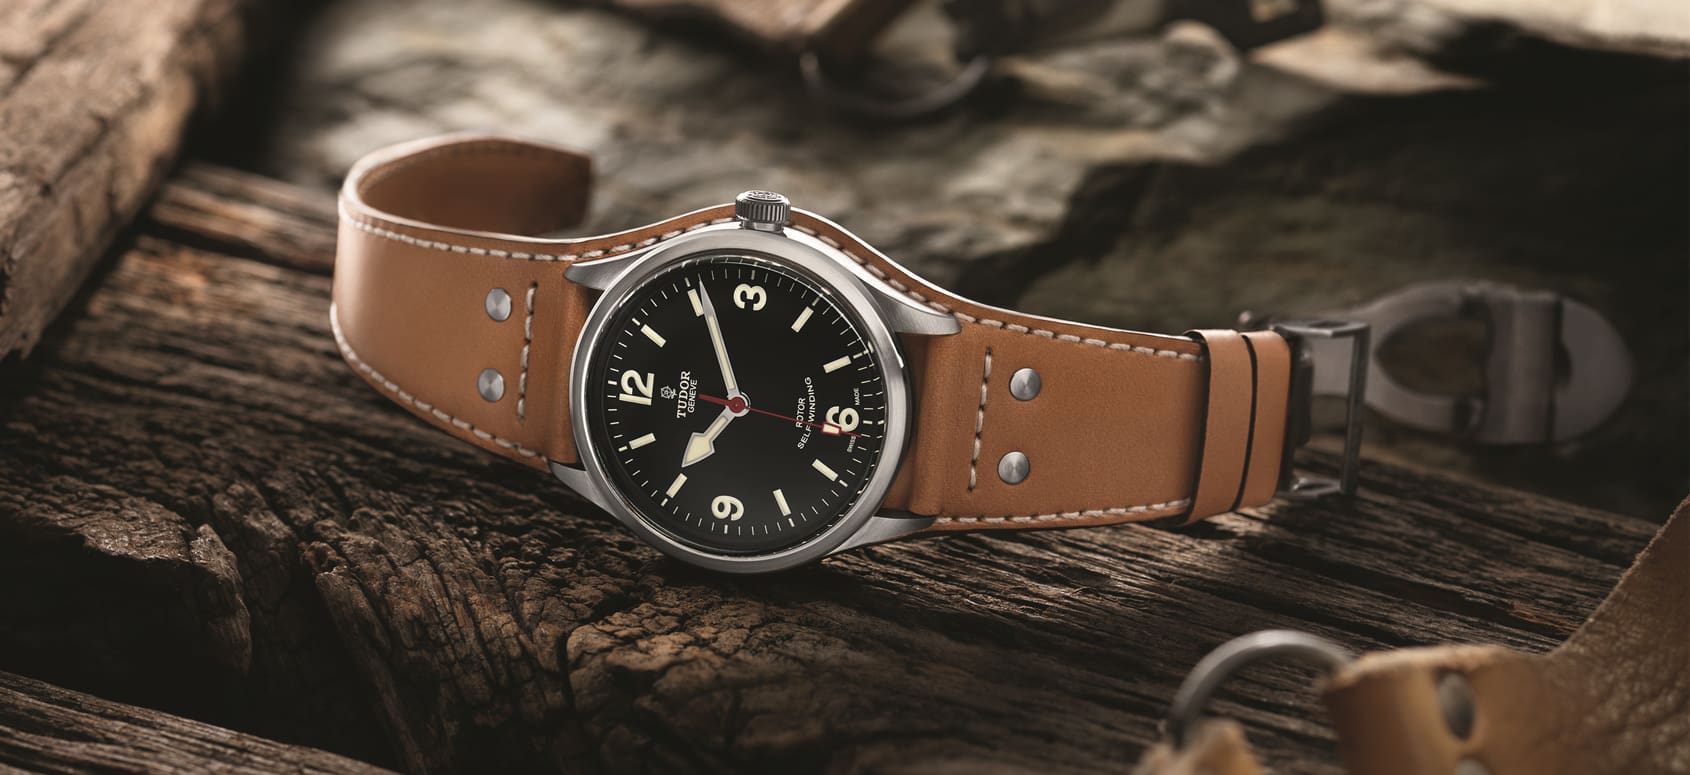 COMPETITION: Where would you take the new Tudor Heritage Ranger?